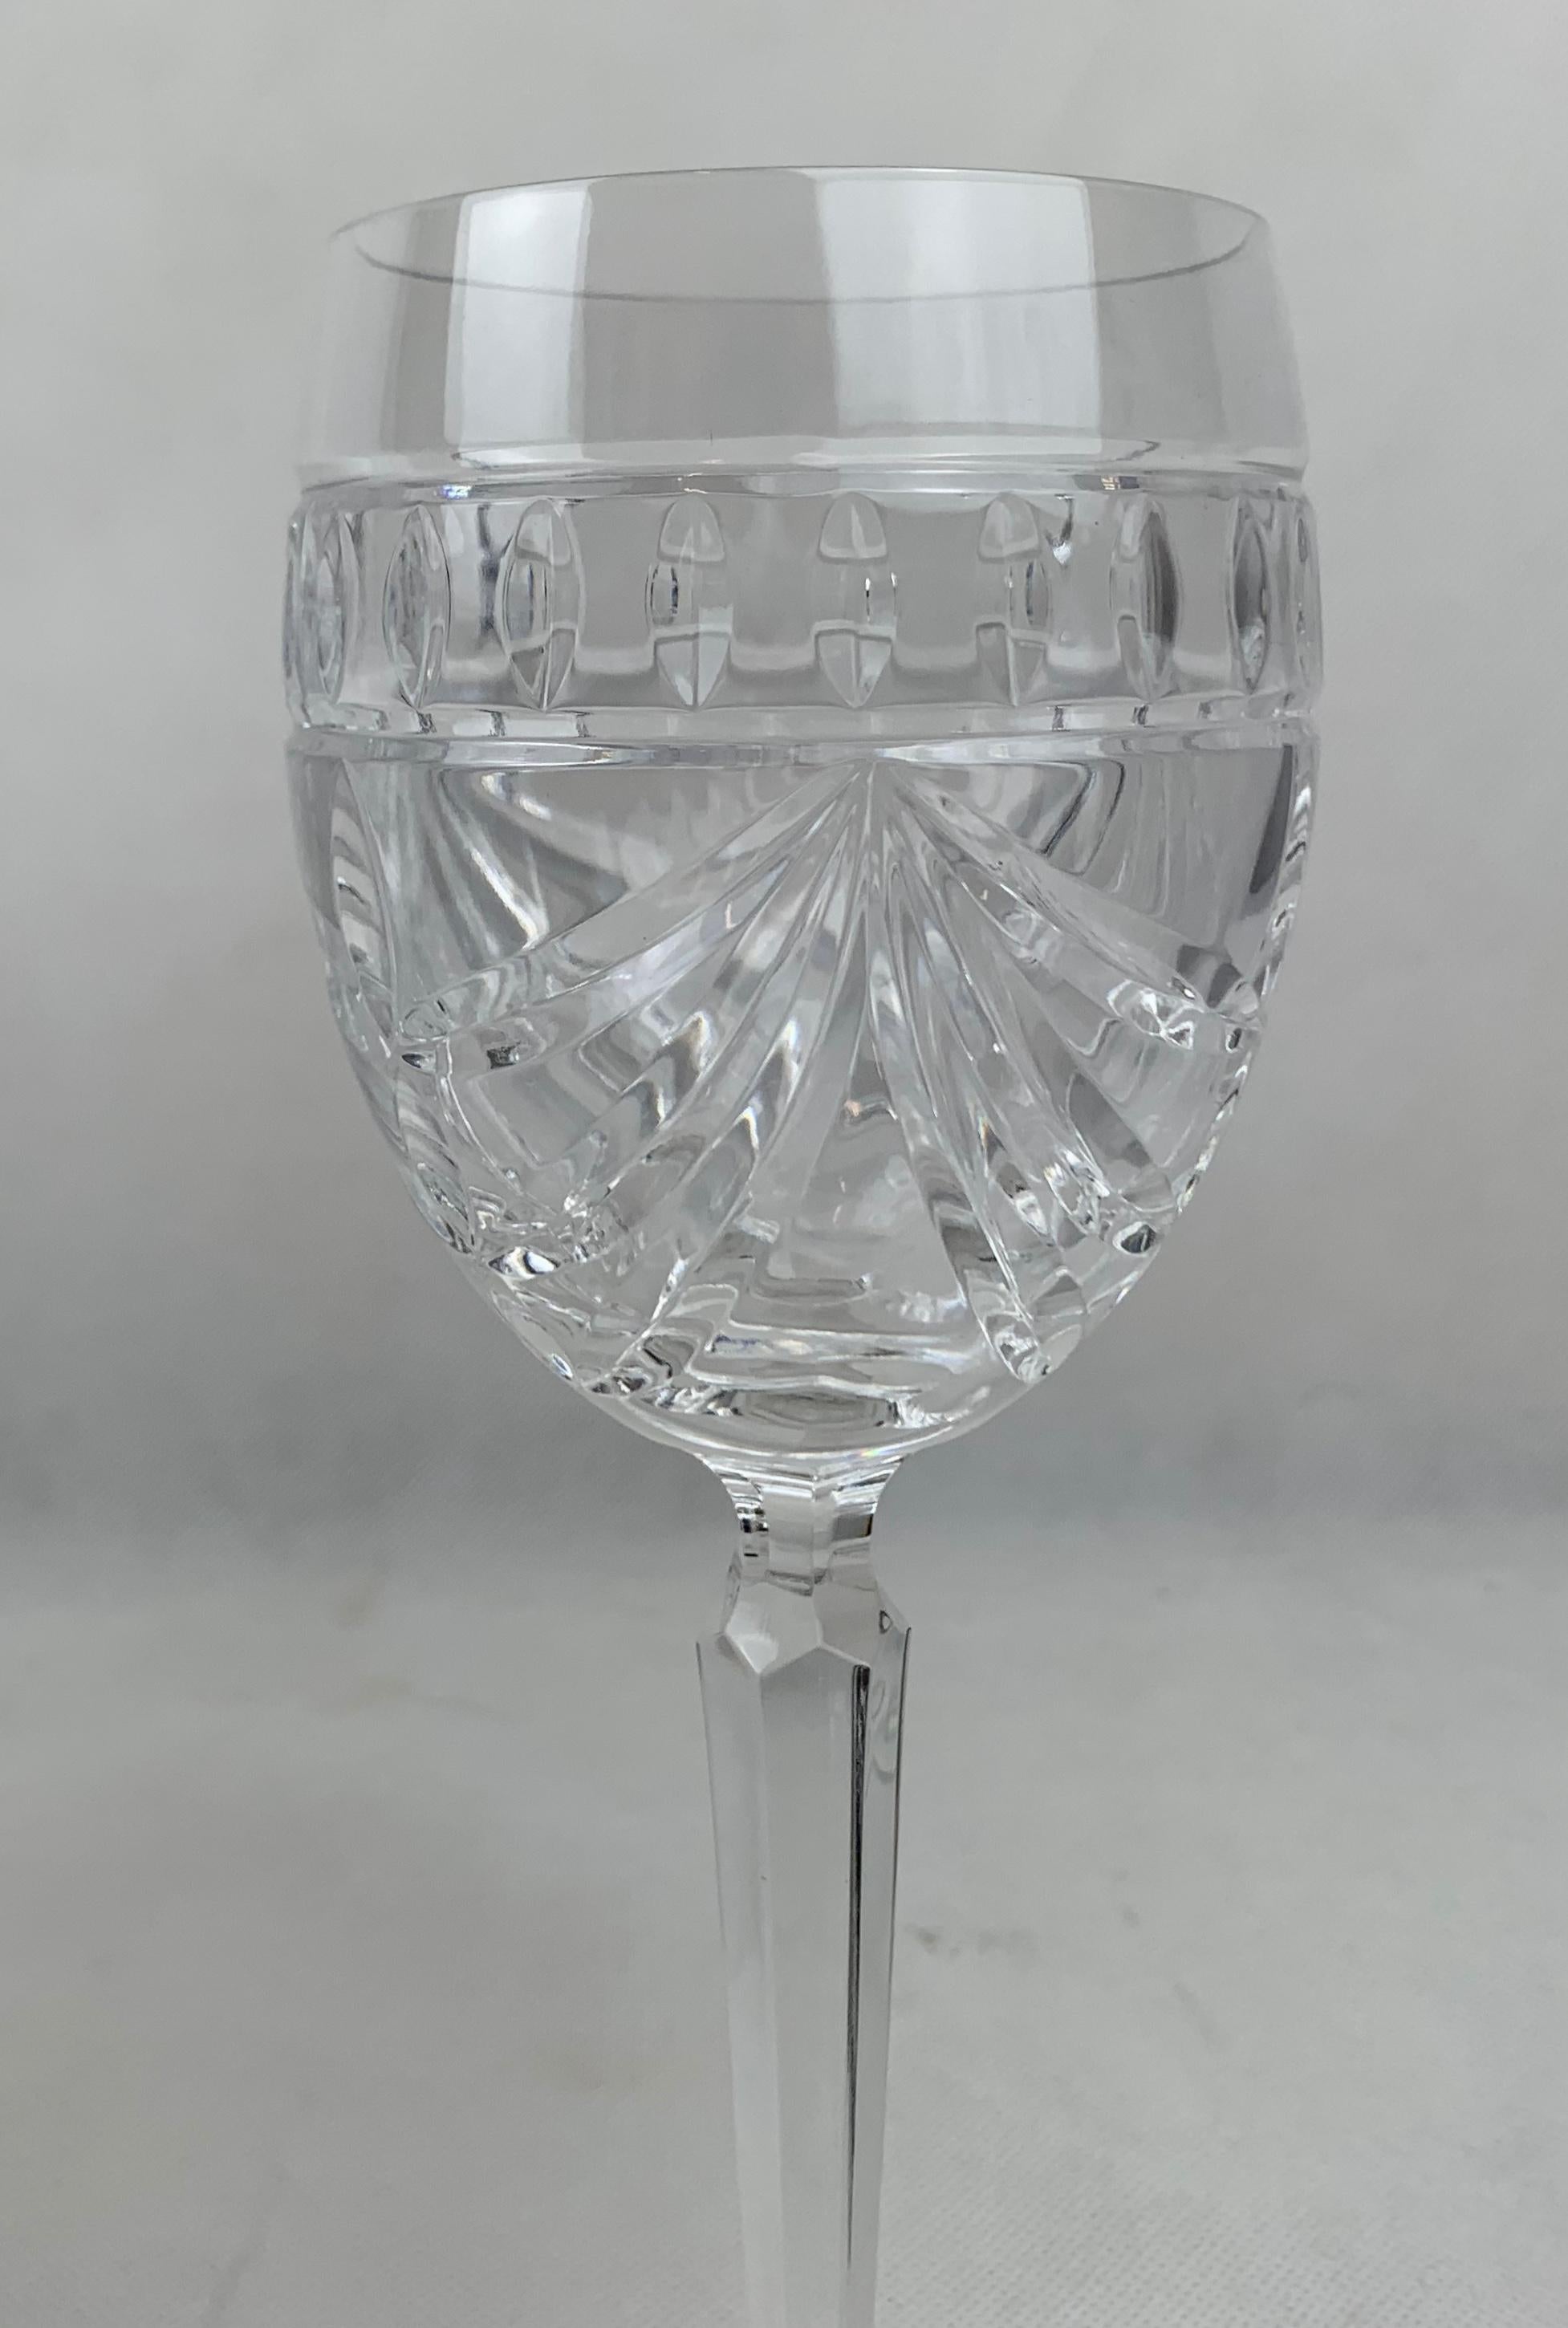 waterford crystal patterns